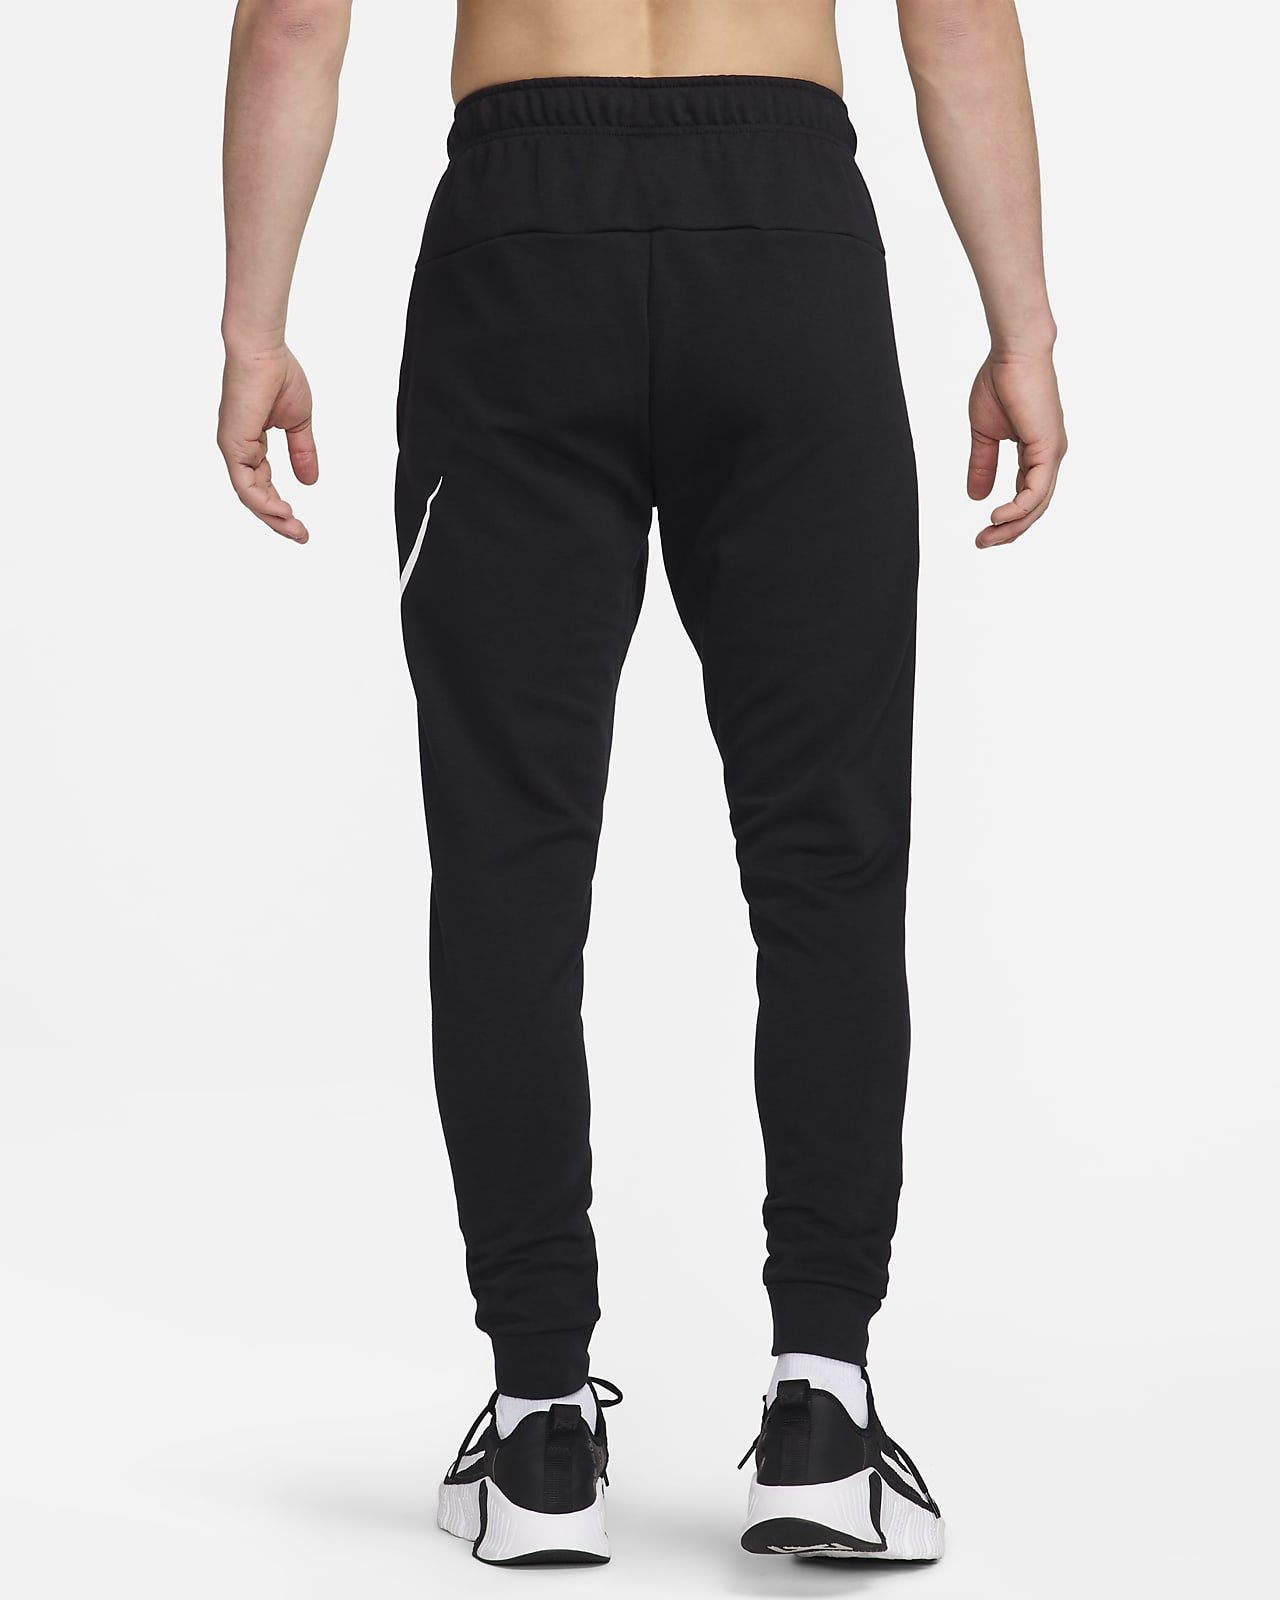 cotton Shaded Blossom Nike Dri-FIT Men's Tapered Training Trousers. Nike ID